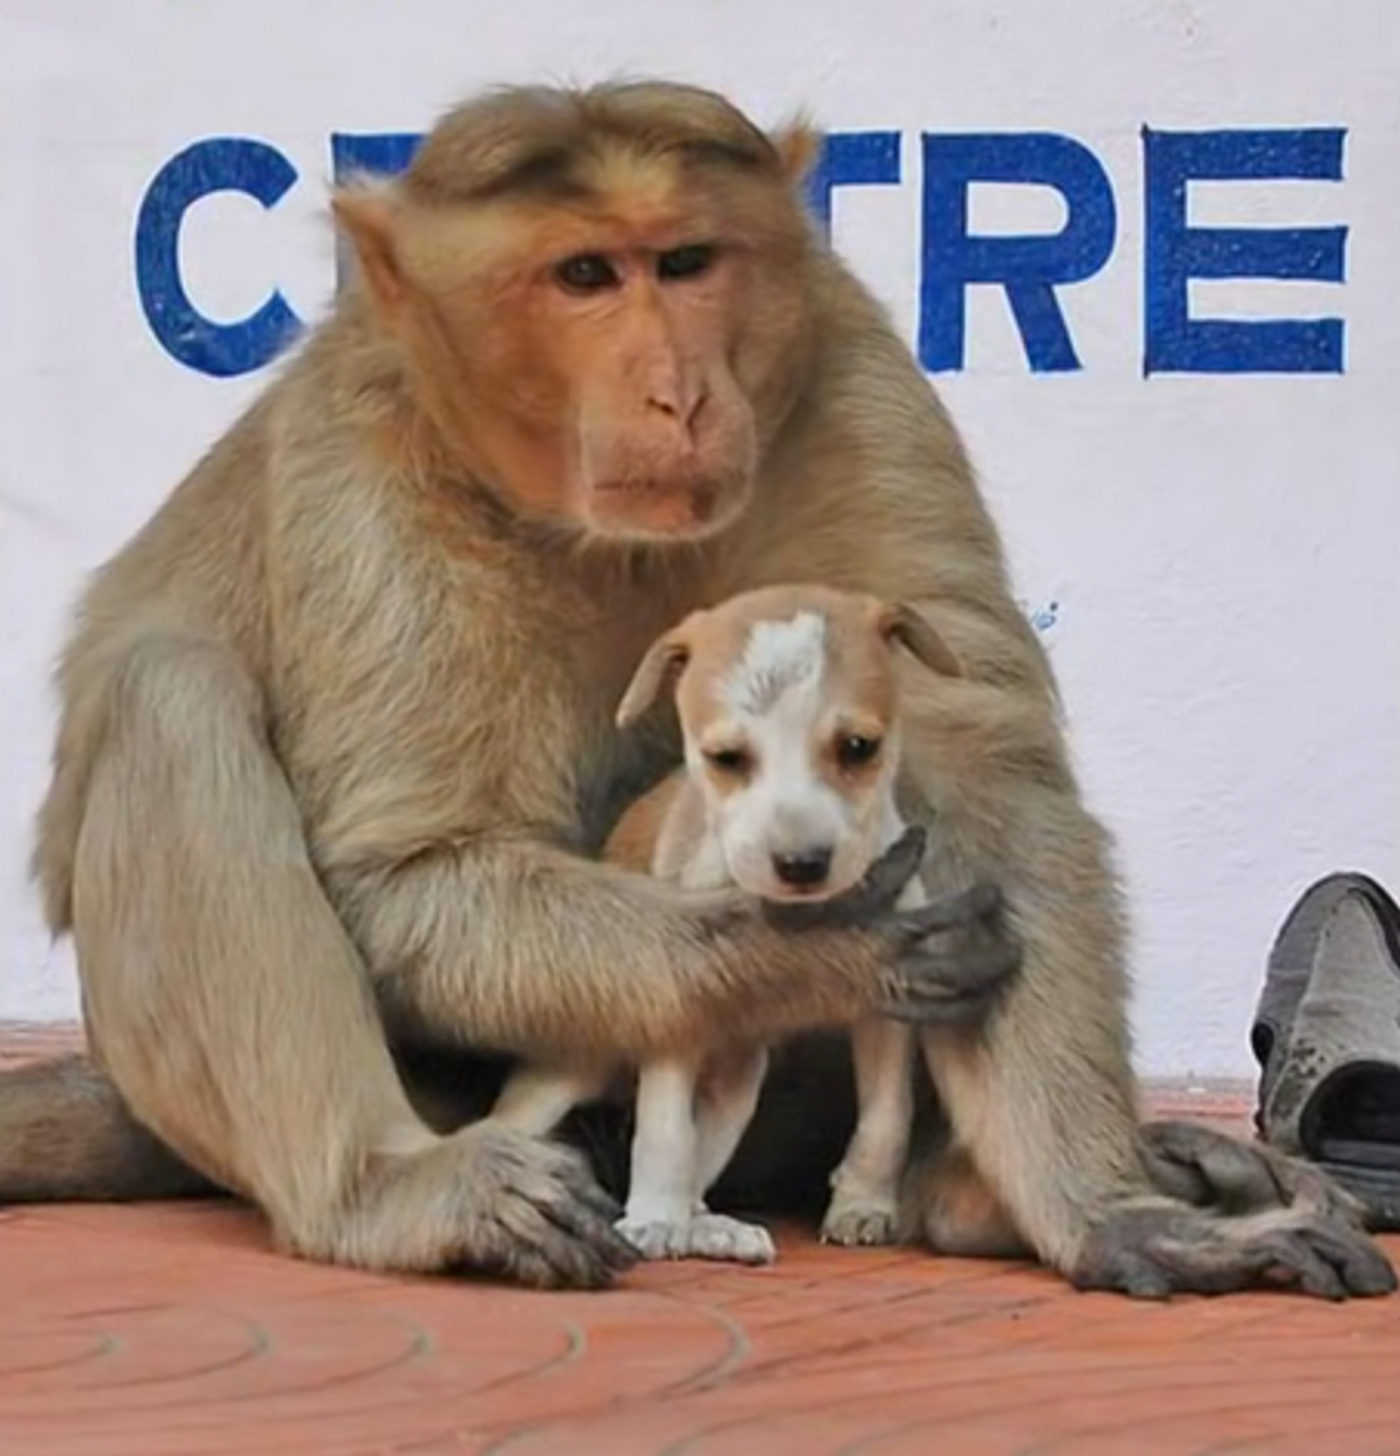 A monkey in India has reportedly adopted a stray dog and is now taking care of it.